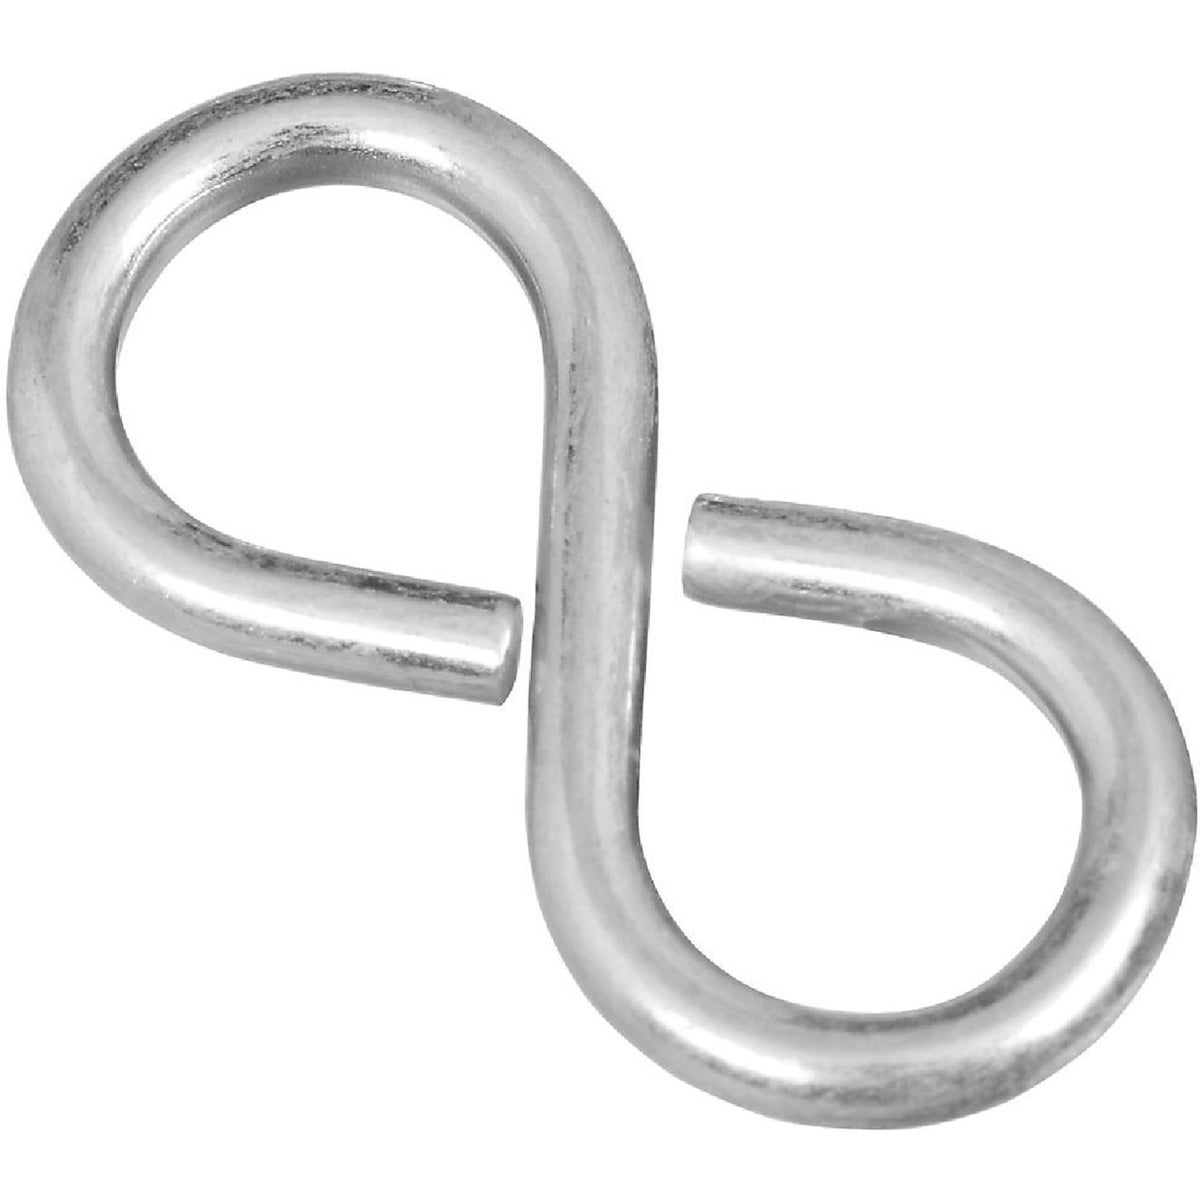 National 1-5/8 In. Zinc Light Closed S Hook (4 Ct.)